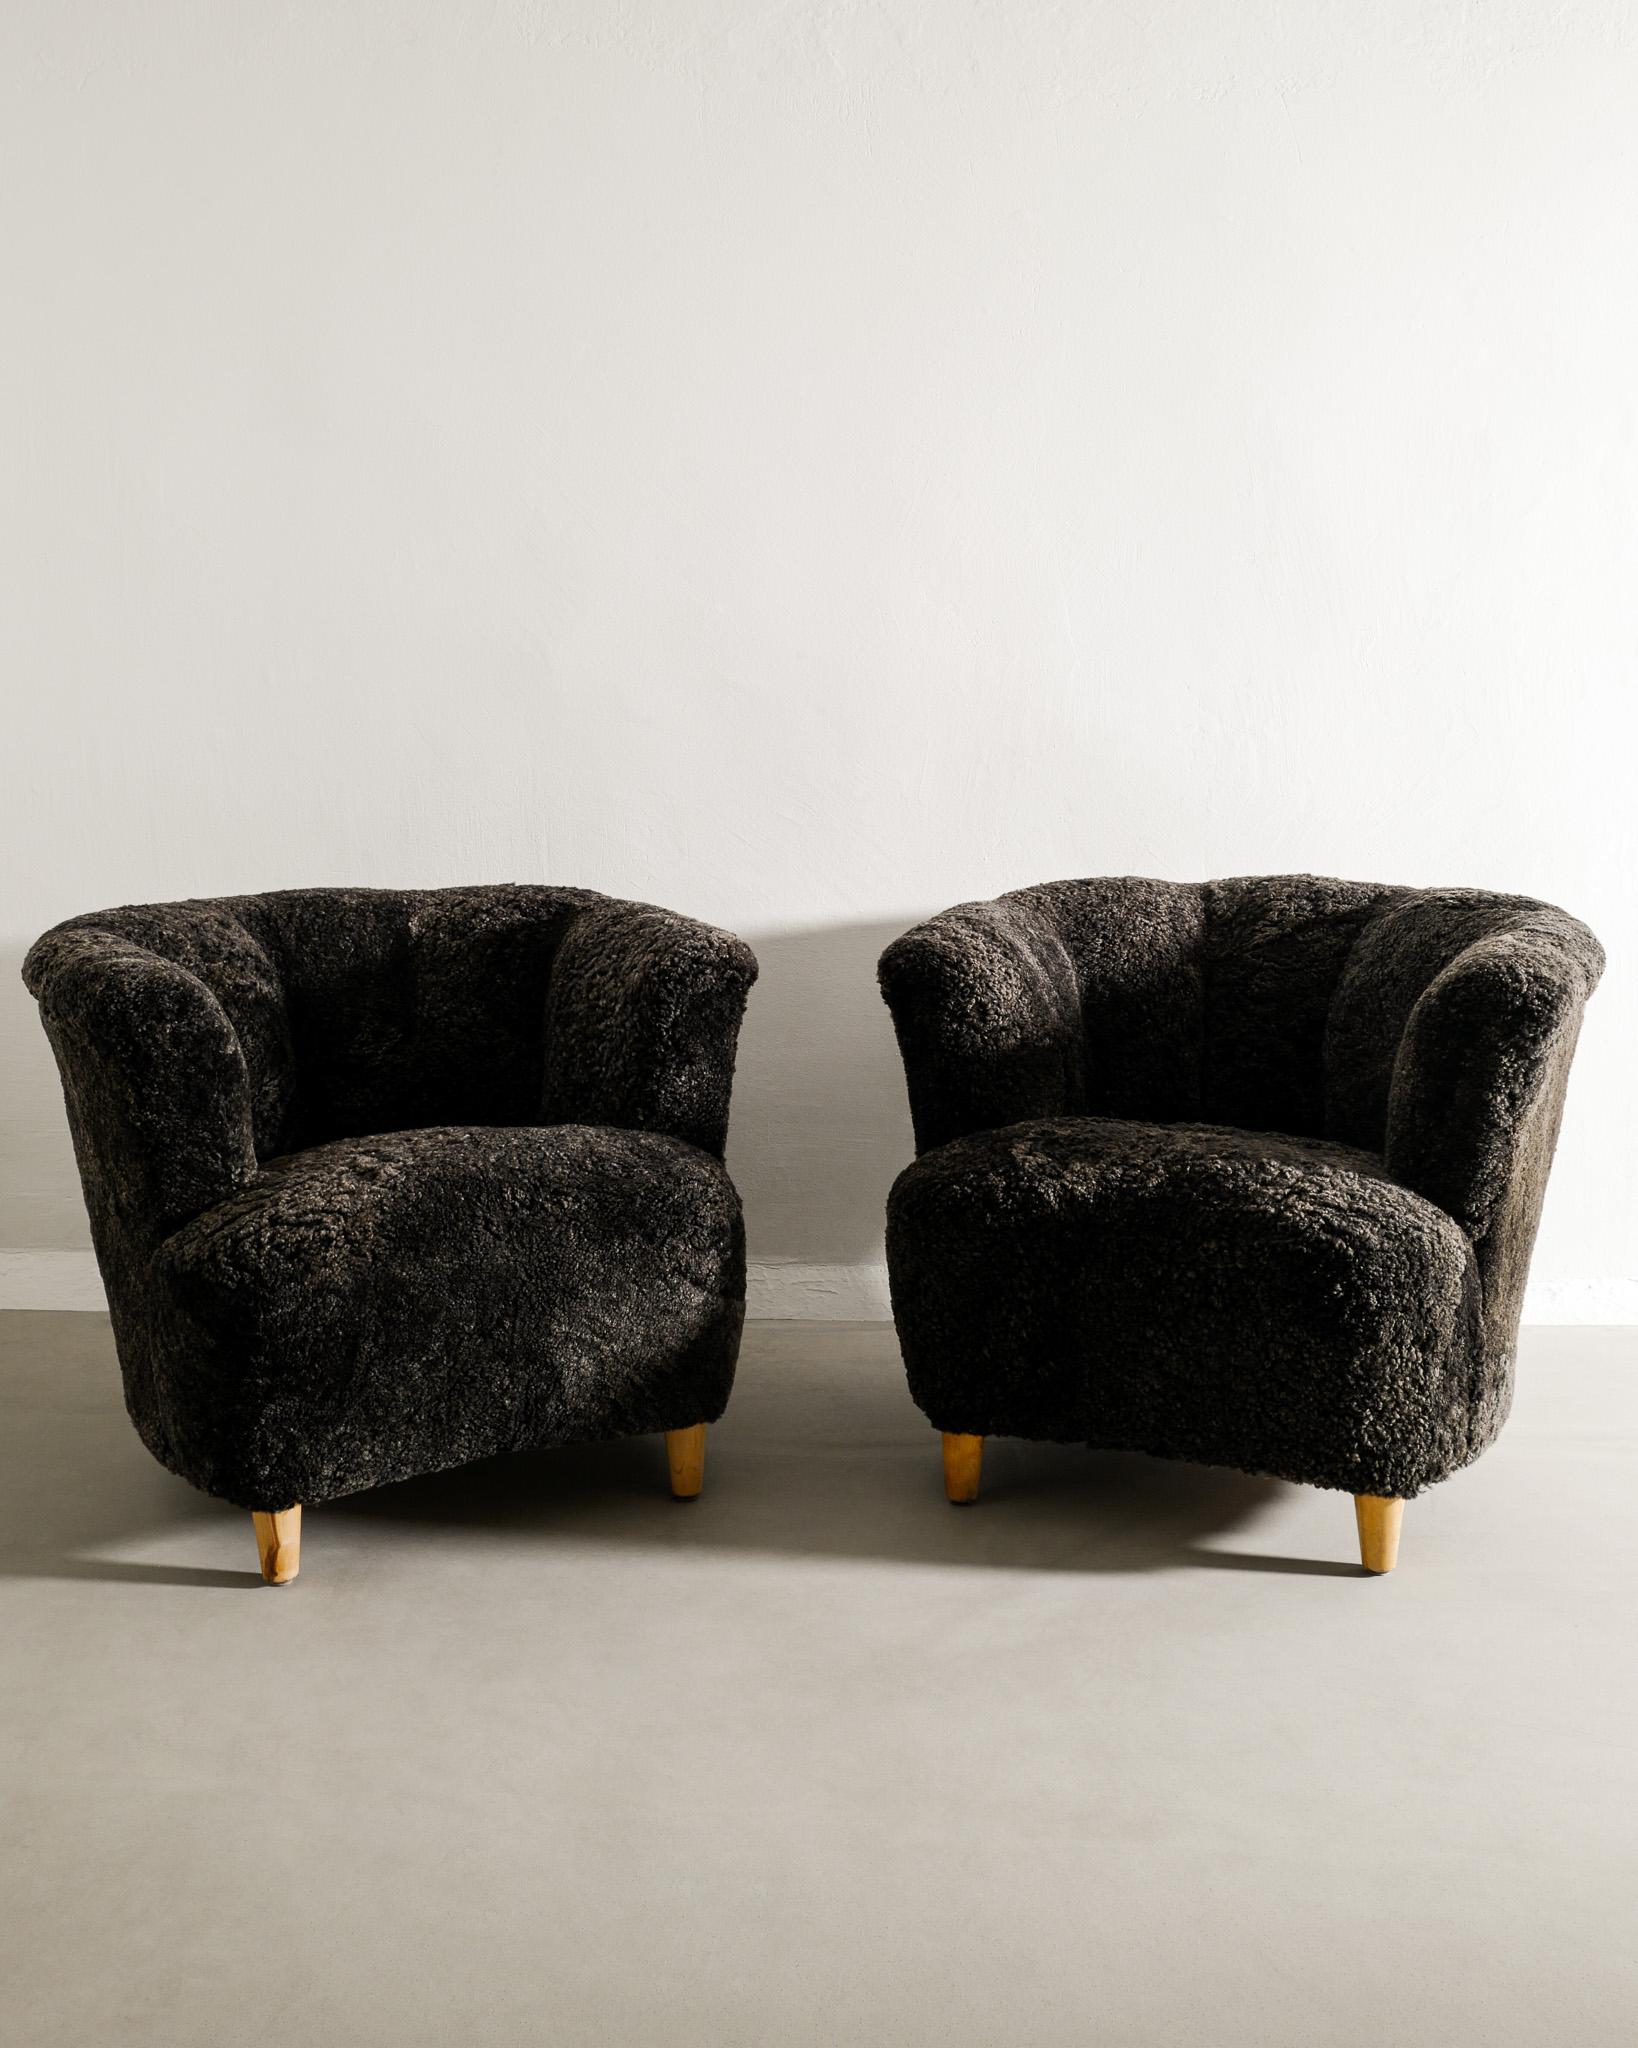 Rare pair of curved Swedish modern armchairs in style of Otto Schultz produced in Sweden, 1940s. In good condition and newly restored and upholstered in charcoal colored sheepskin. 

Dimensions: H: 68 cm / 27